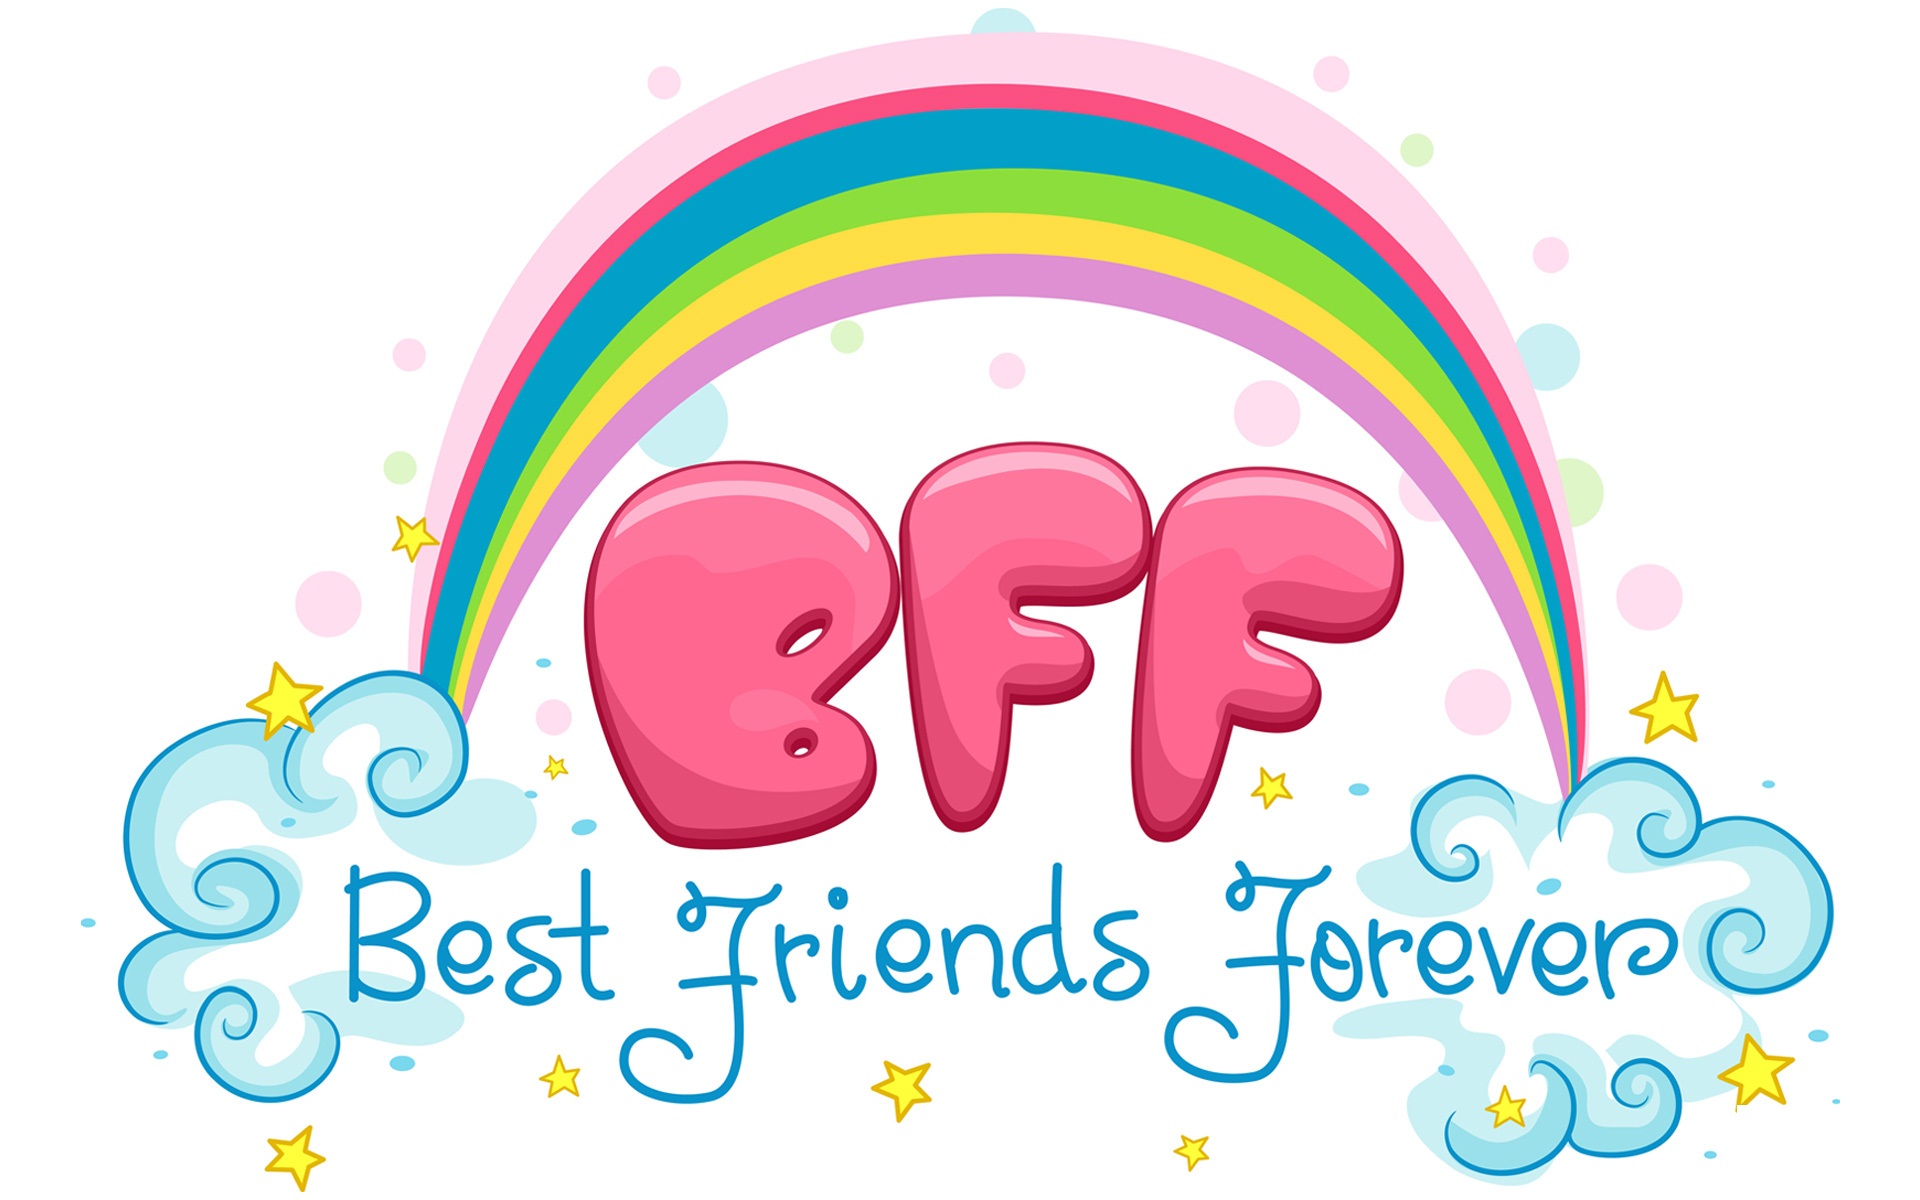 3d people friends free clipart wallpaper - Clipground